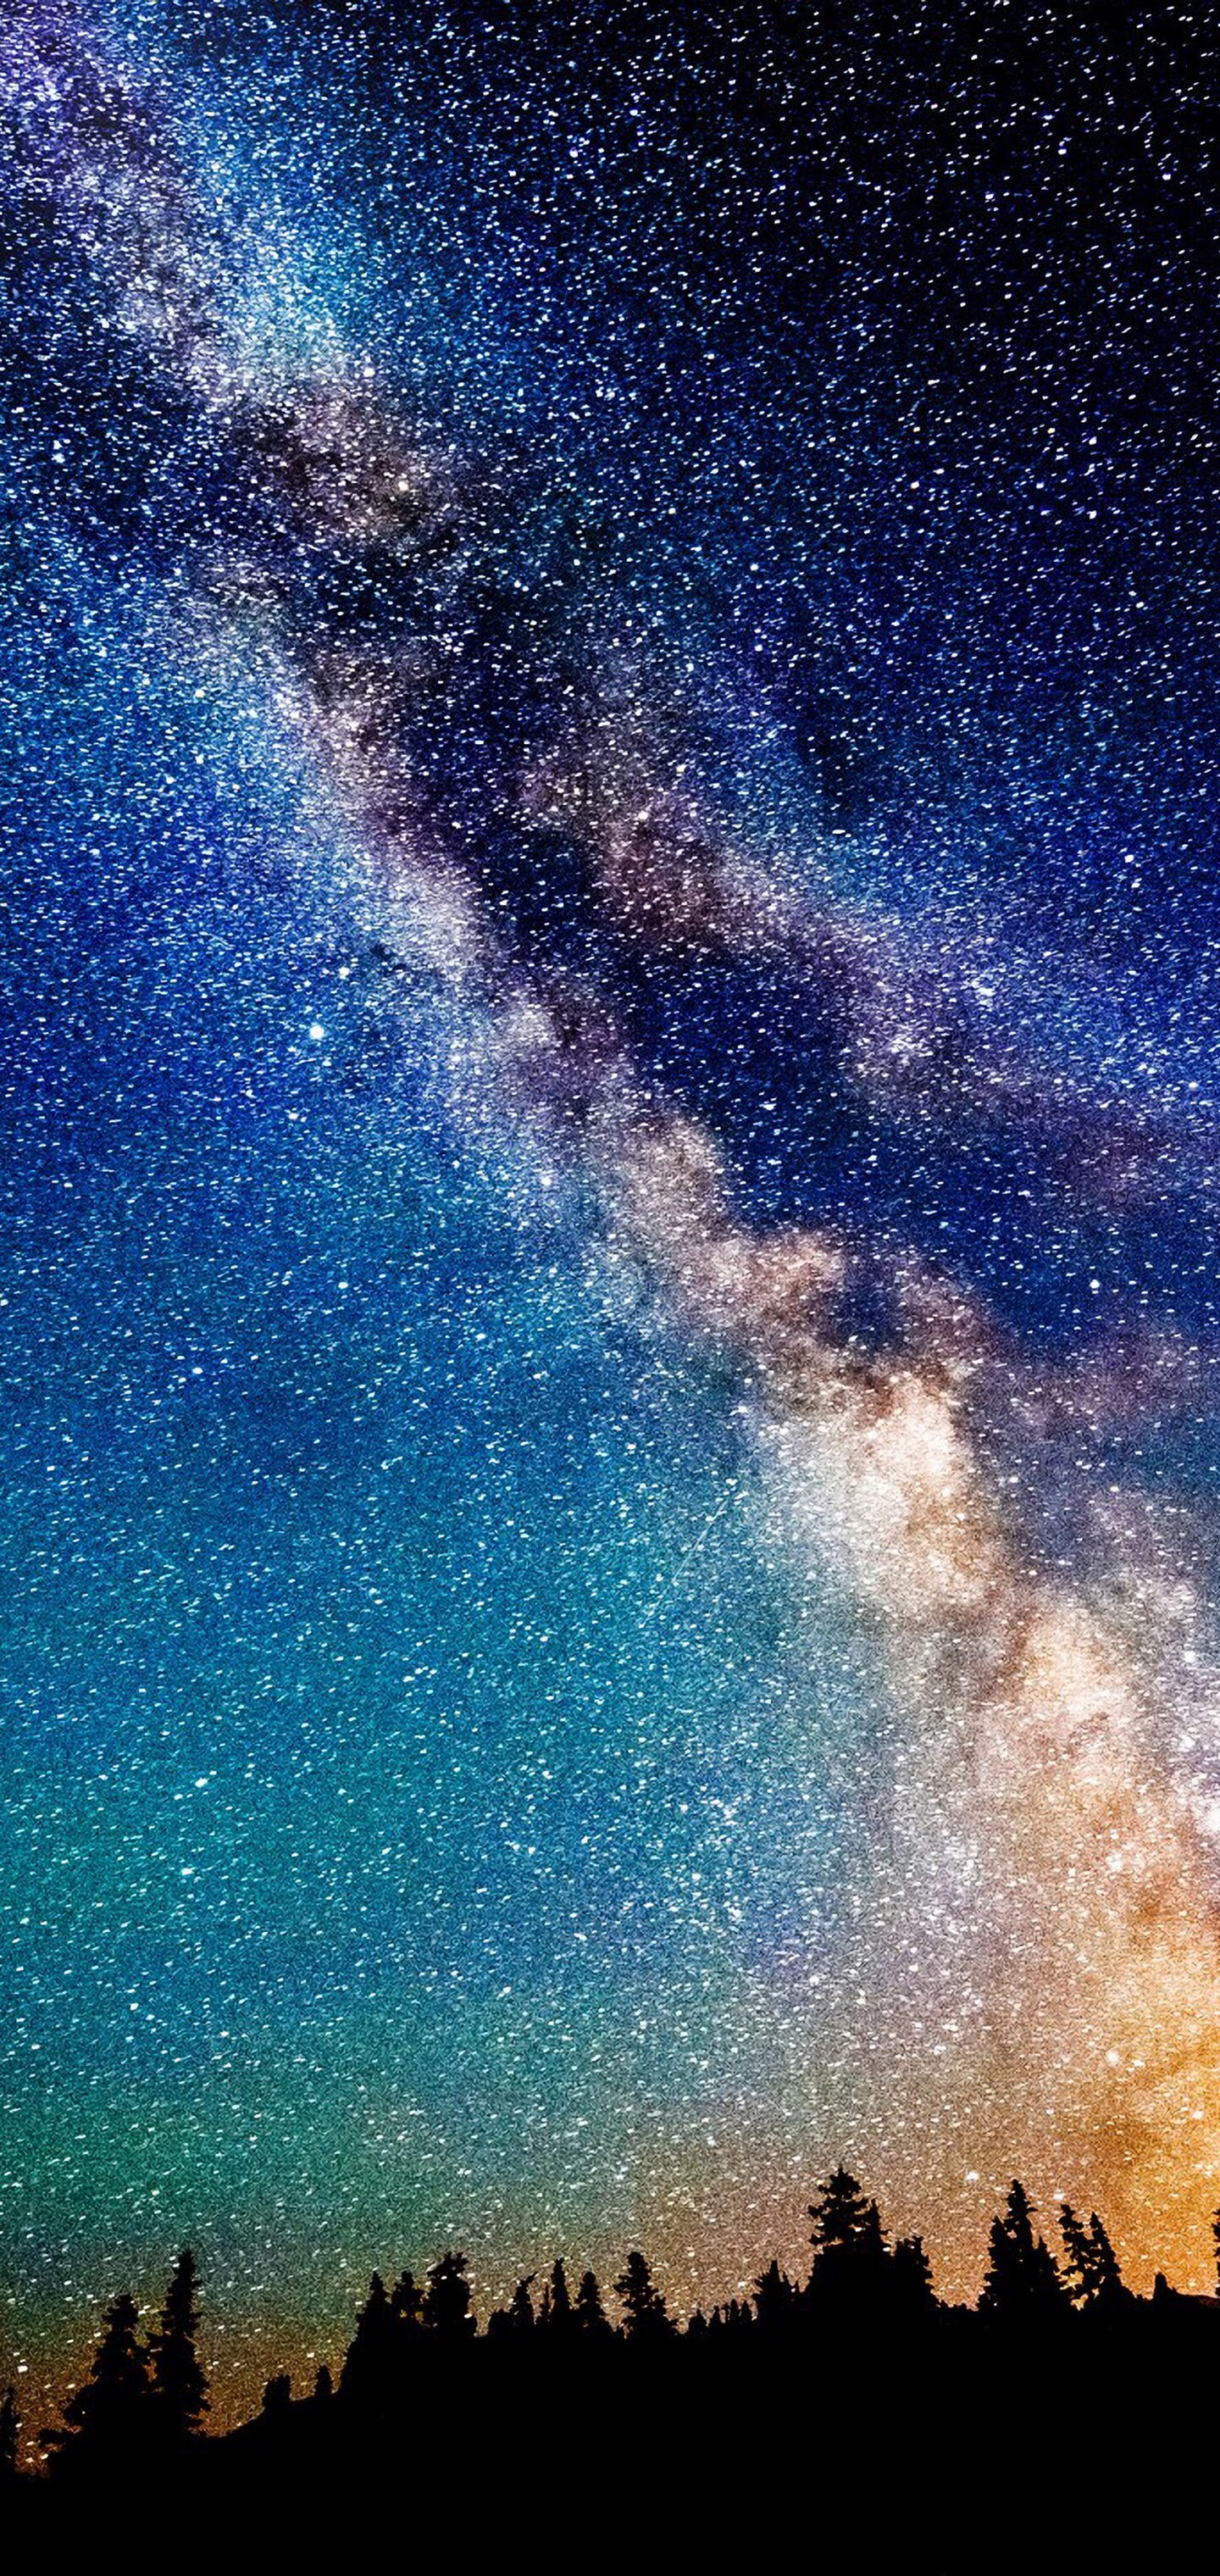 Milky Way: The galaxy is visible as a hazy band of white light arching the night sky, Stars, Scenery. 1440x3040 HD Wallpaper.